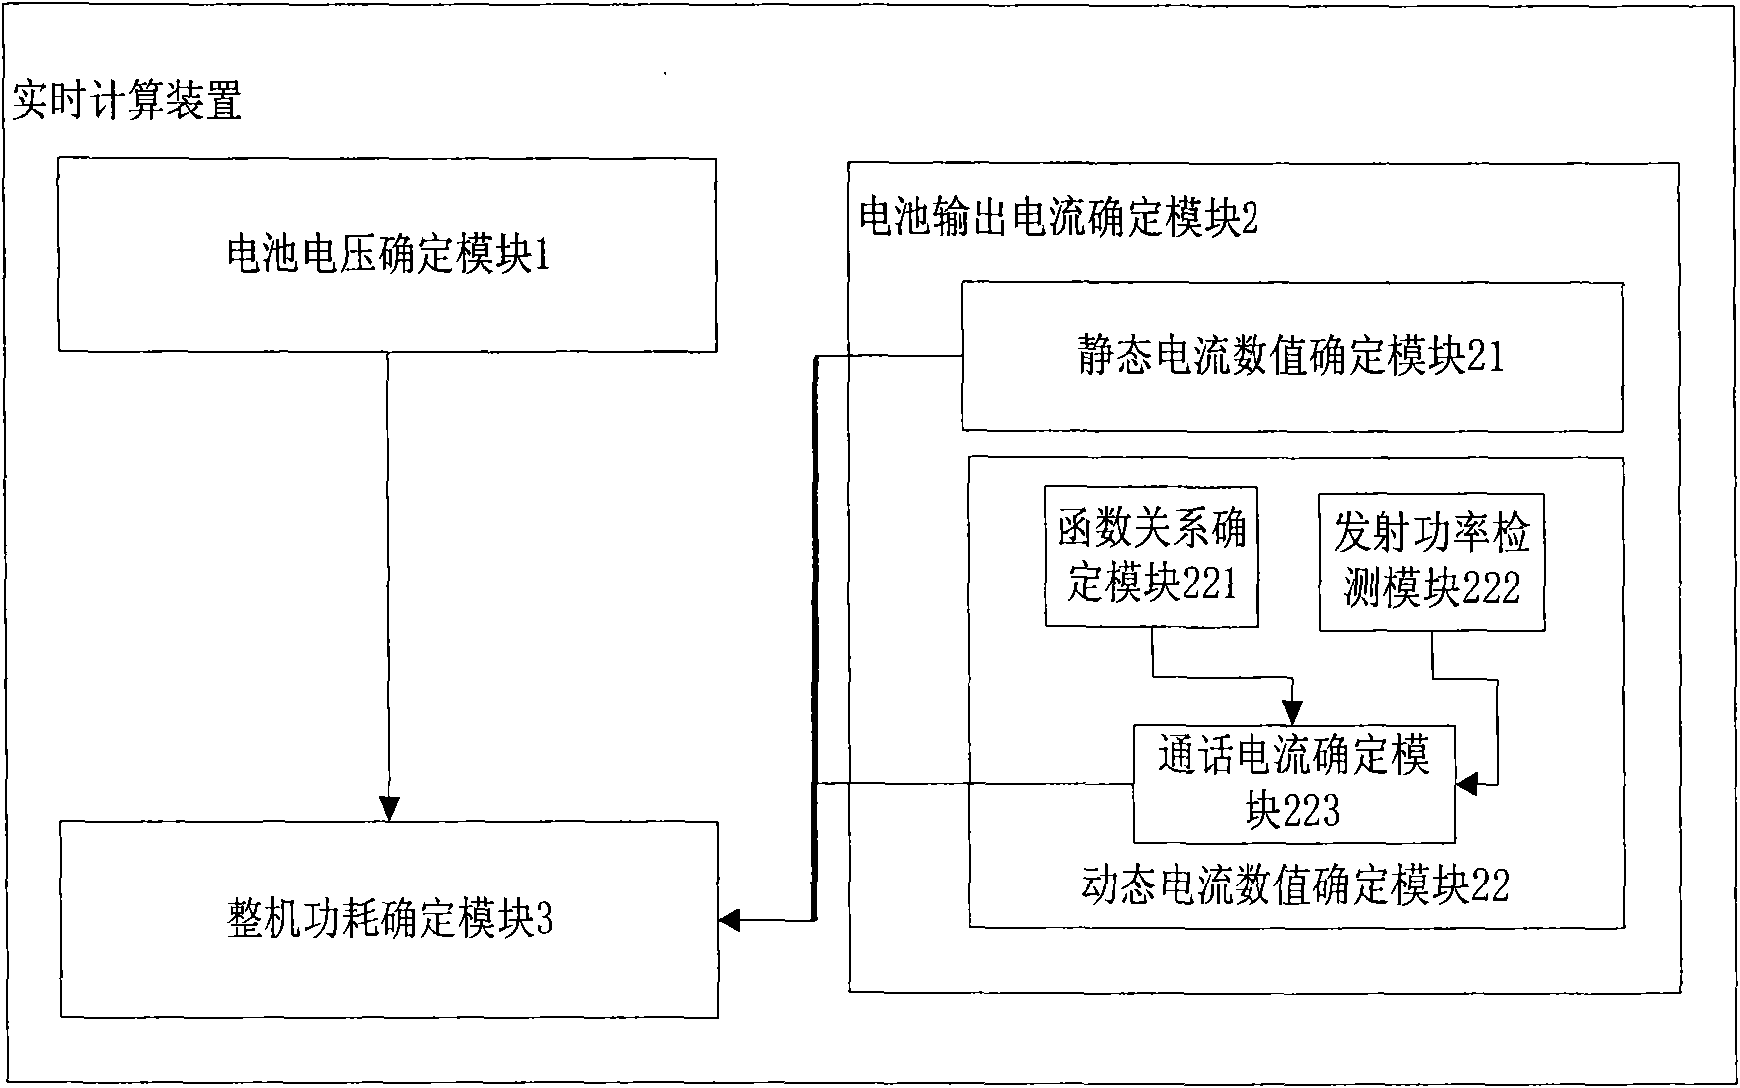 Method and device for calculating complete power consumption of CDMA mobile phone in real time